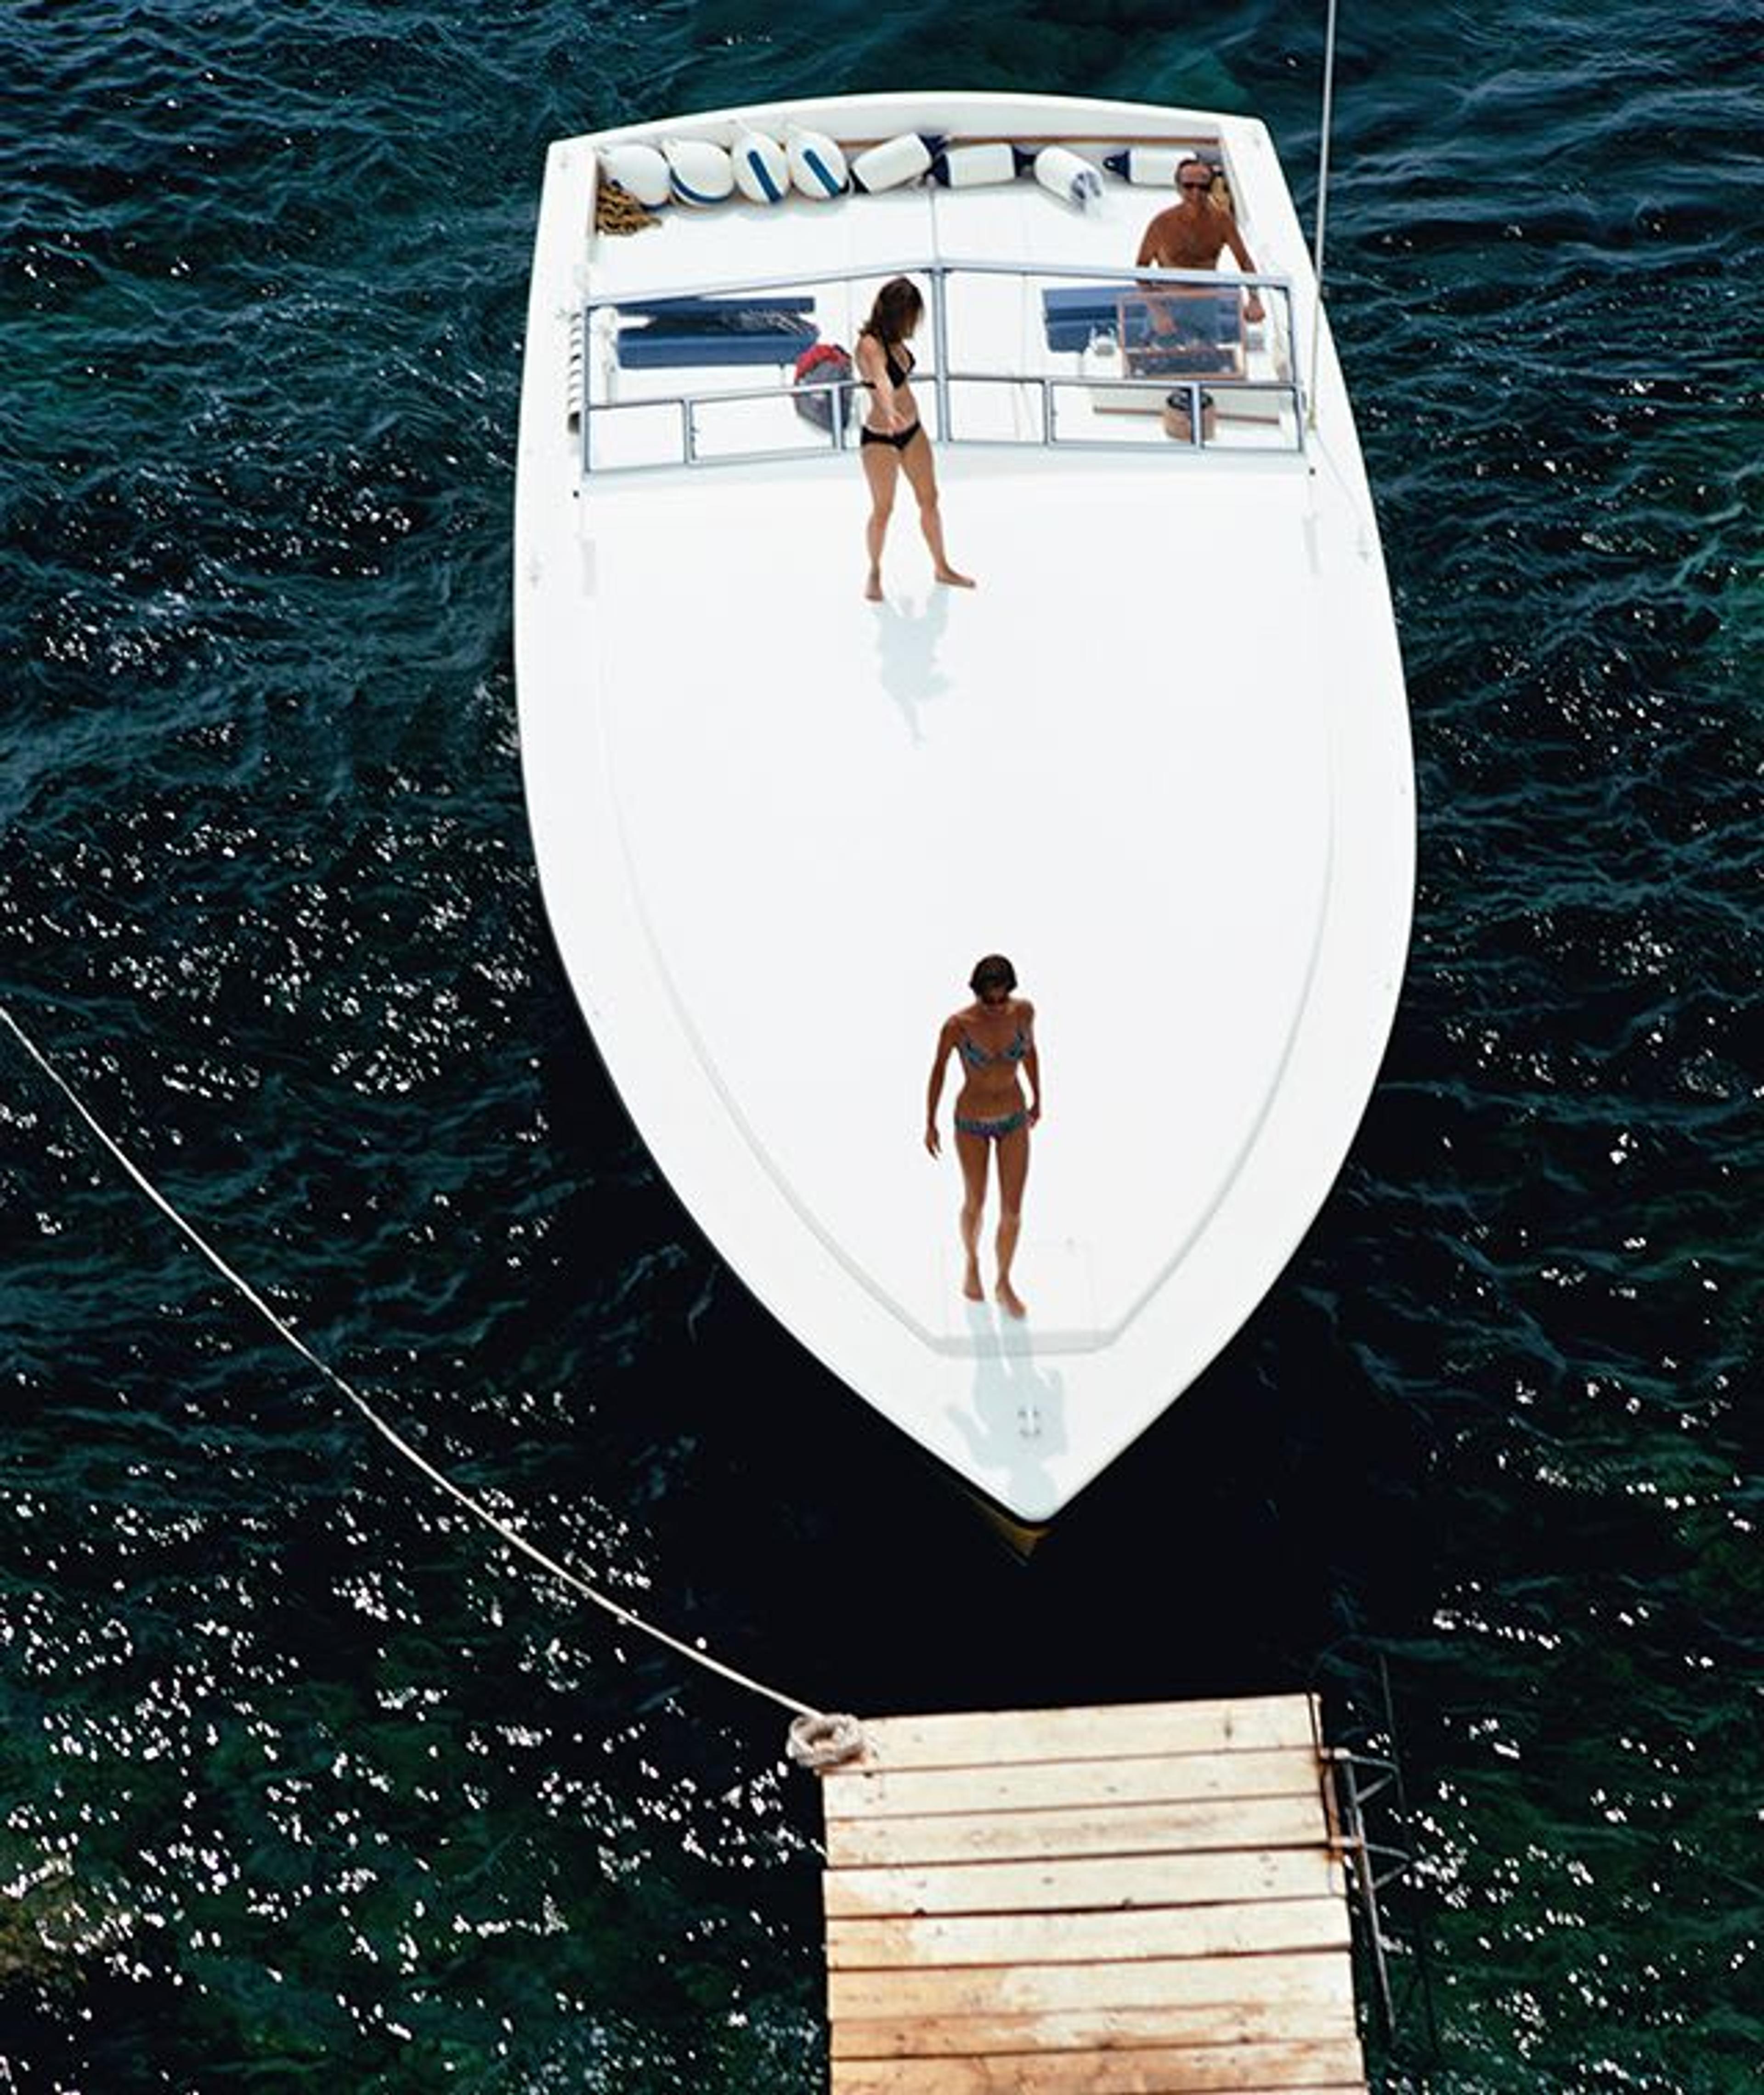 Capri Holiday by Slim Aarons, Getty Images